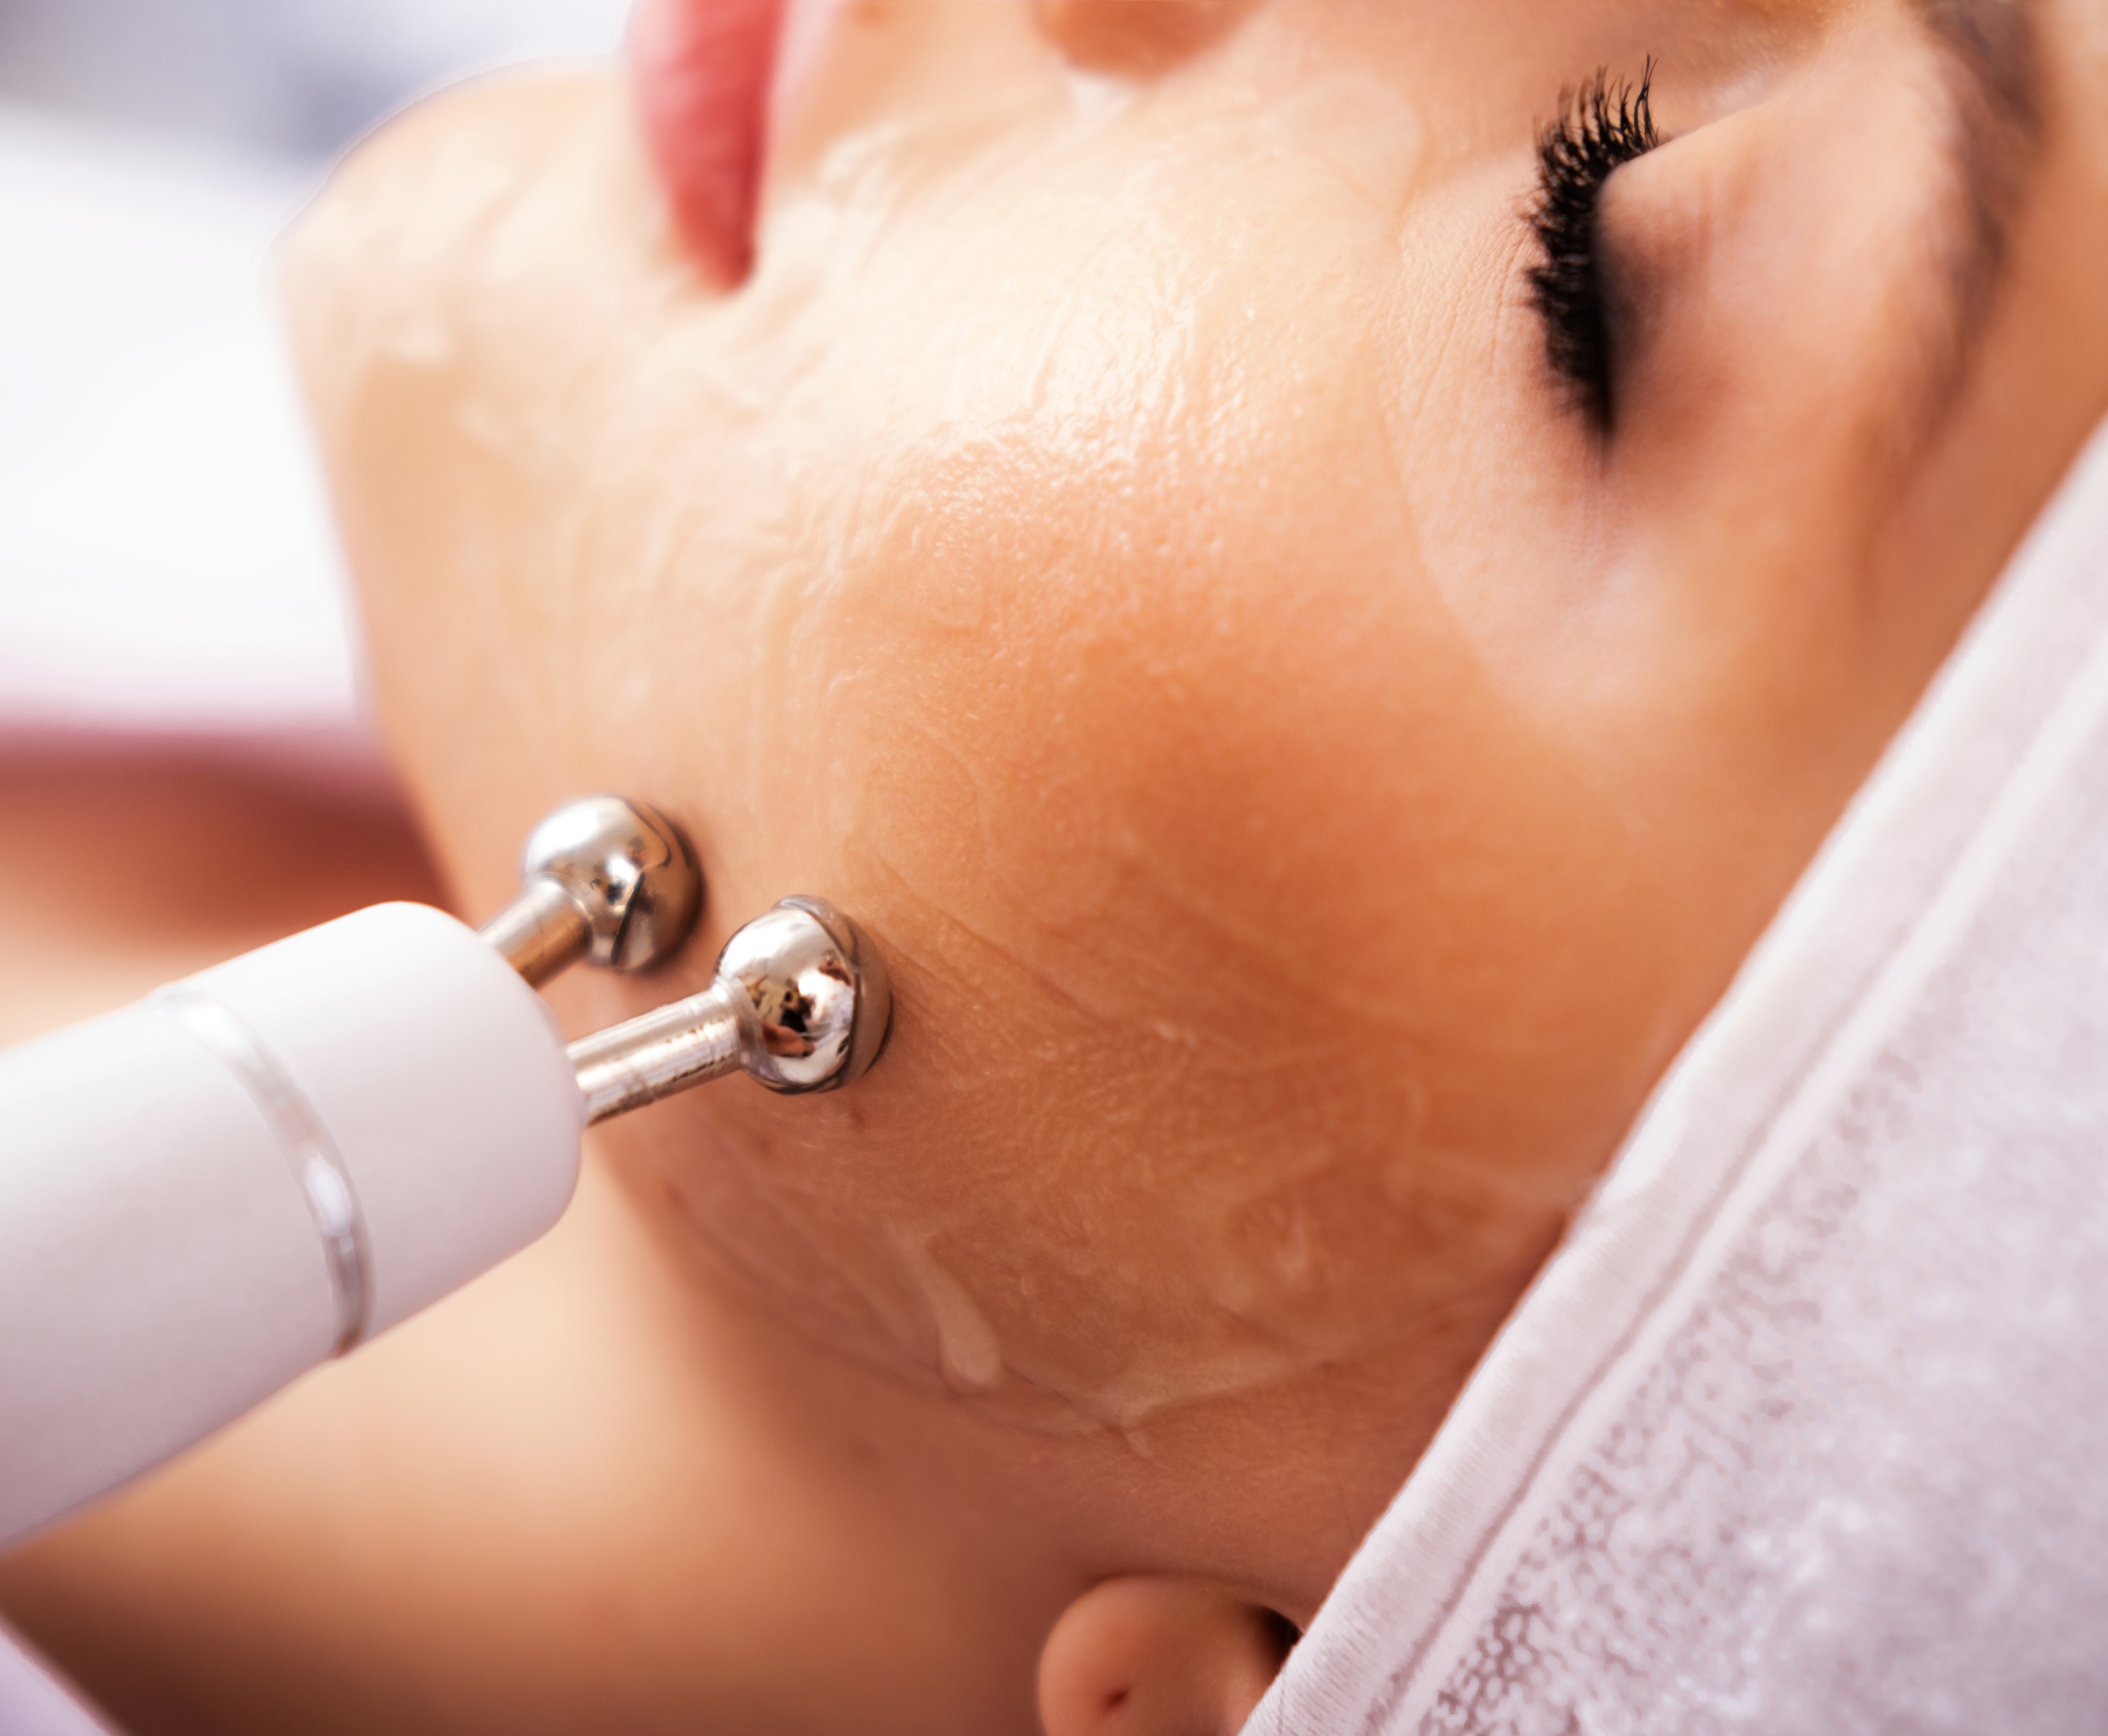 Close-up of a woman receiving a facial micro-sculpting treatment with a syringe, highlighting precision and care.